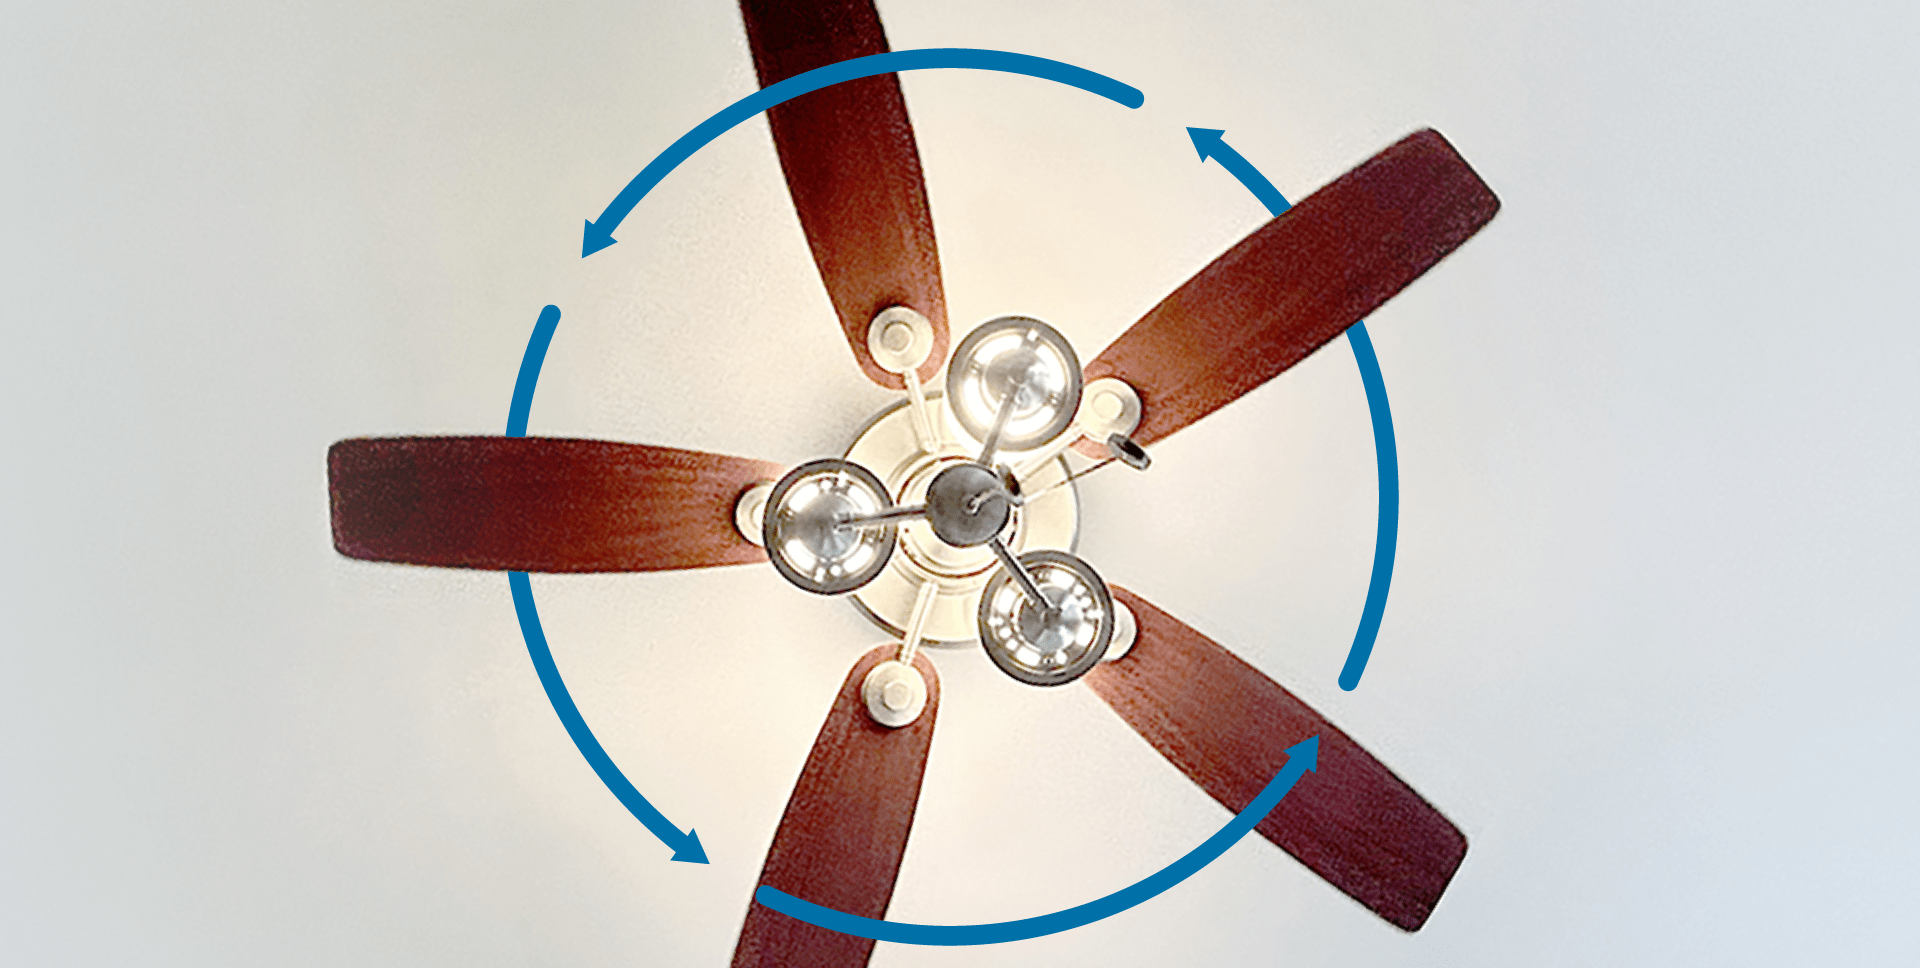 Ceiling fan with arrows indicating a counterclockwise rotation